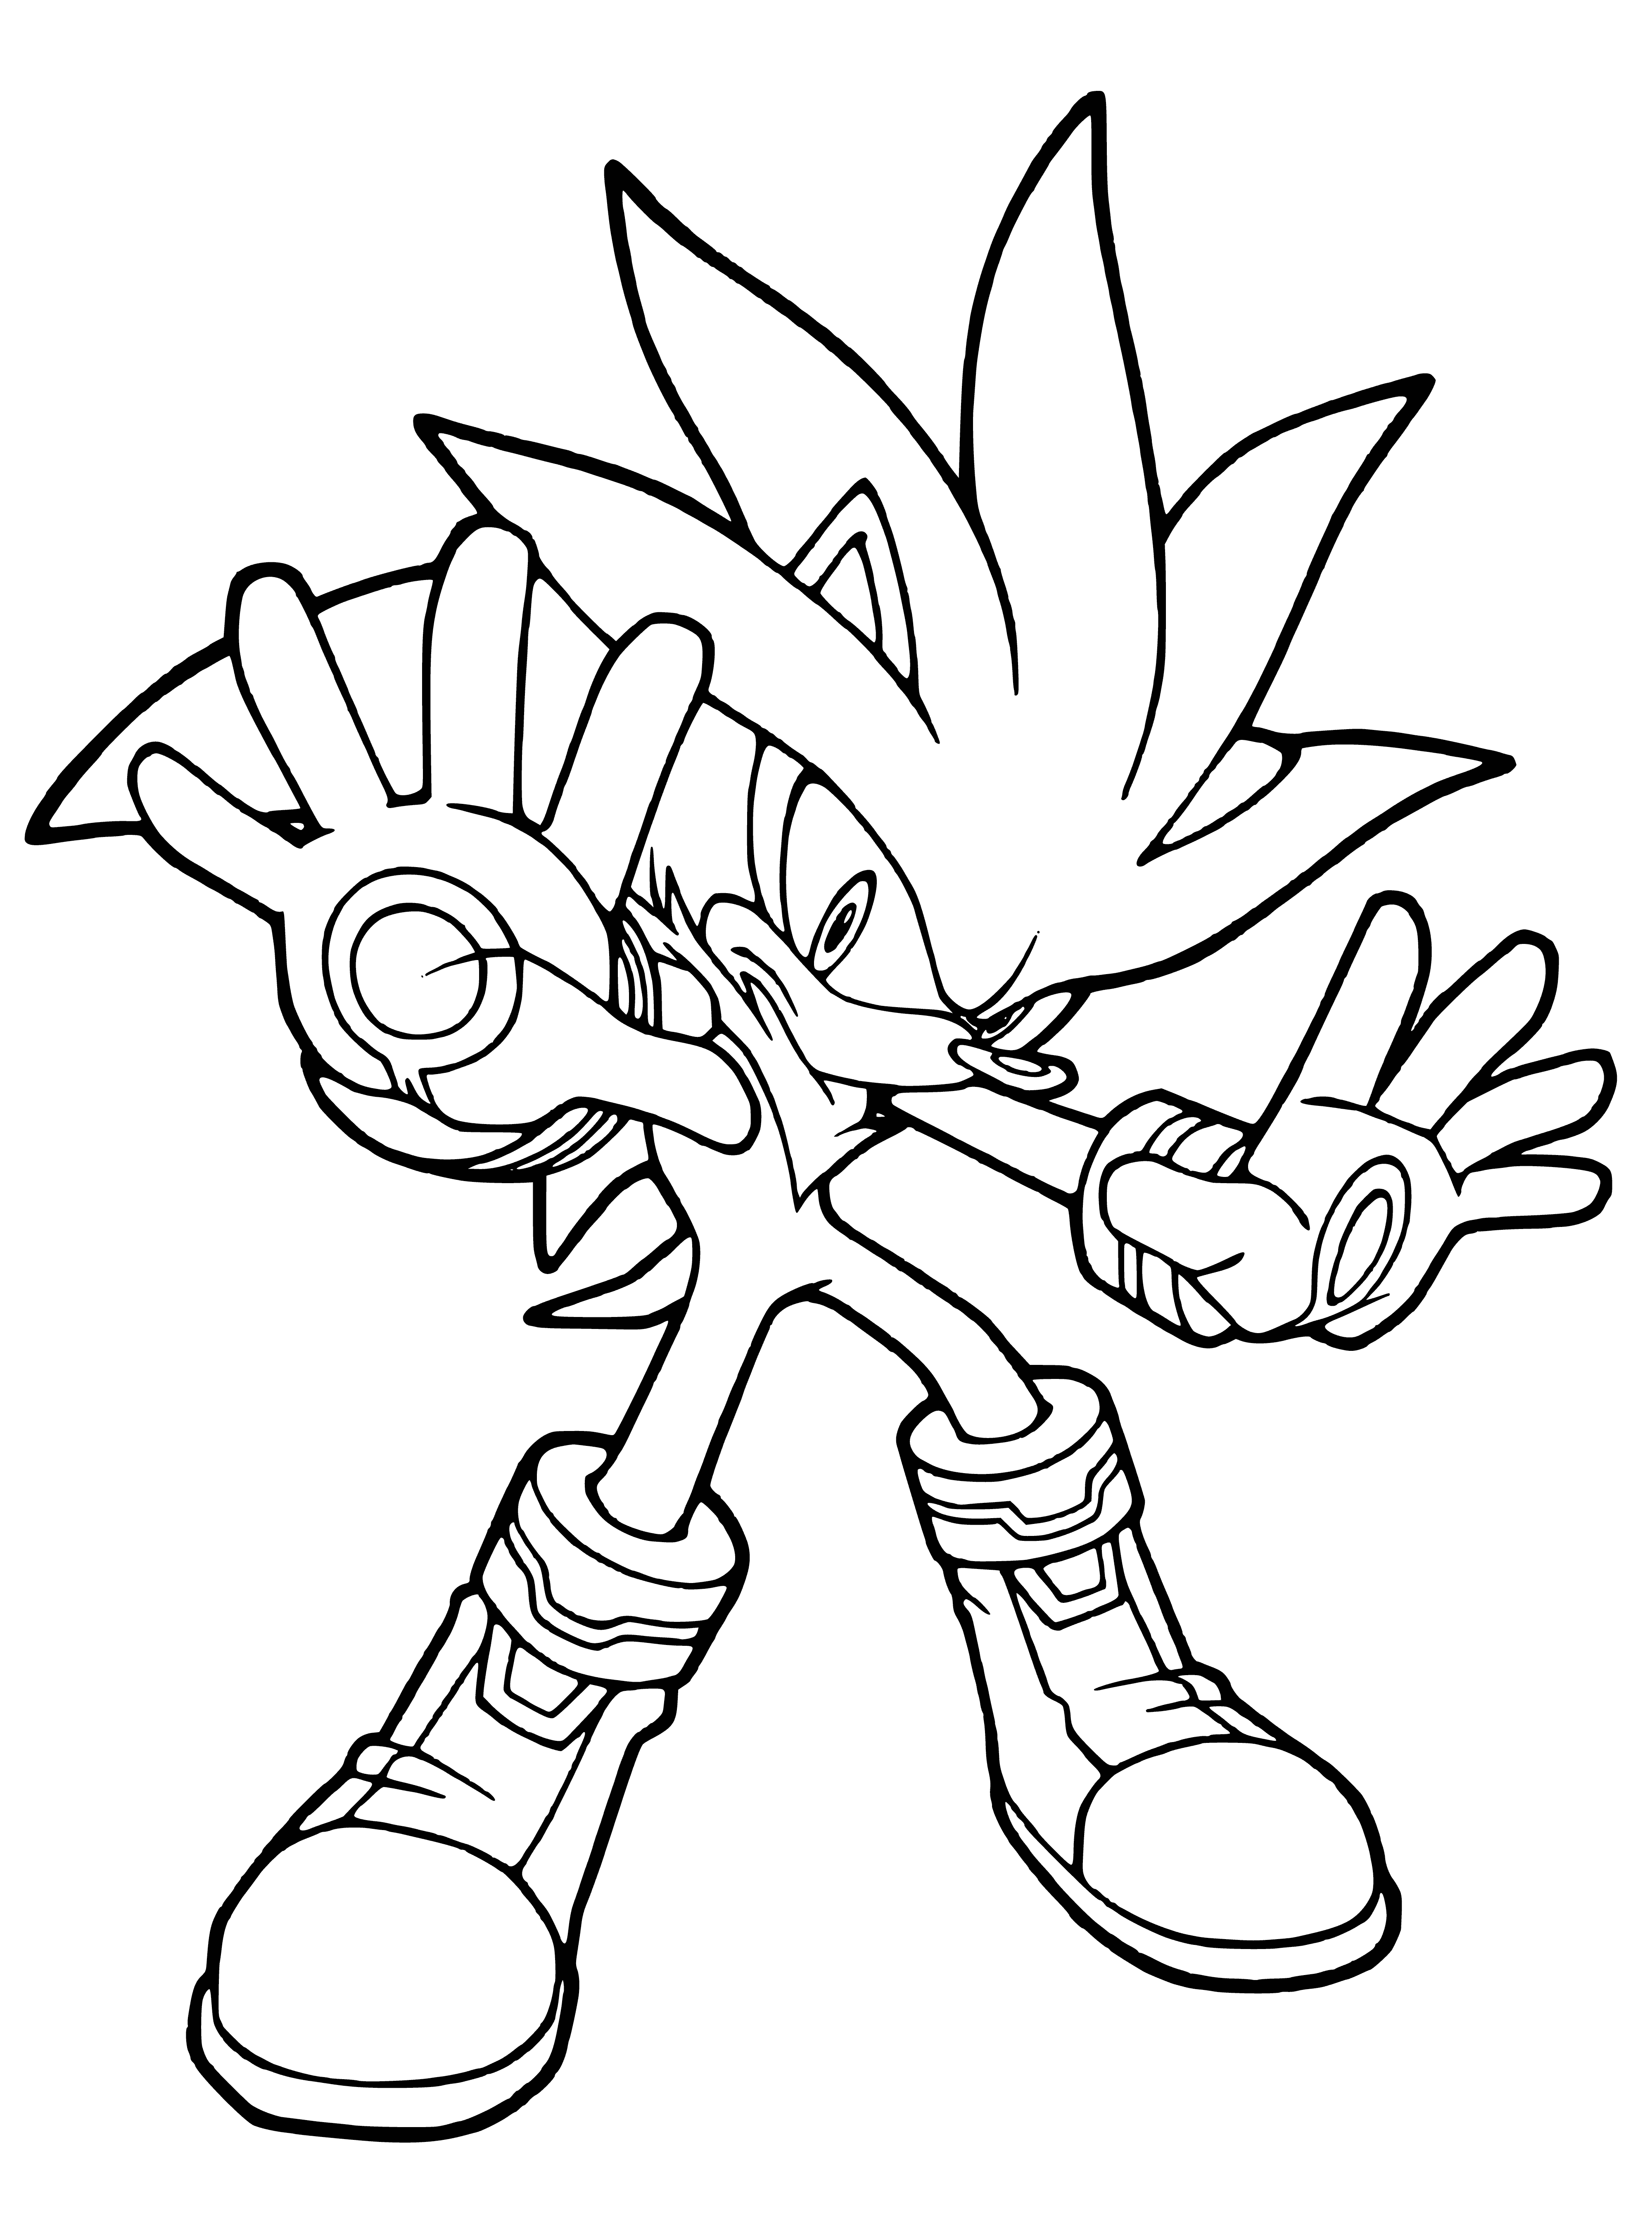 Silver coloring page